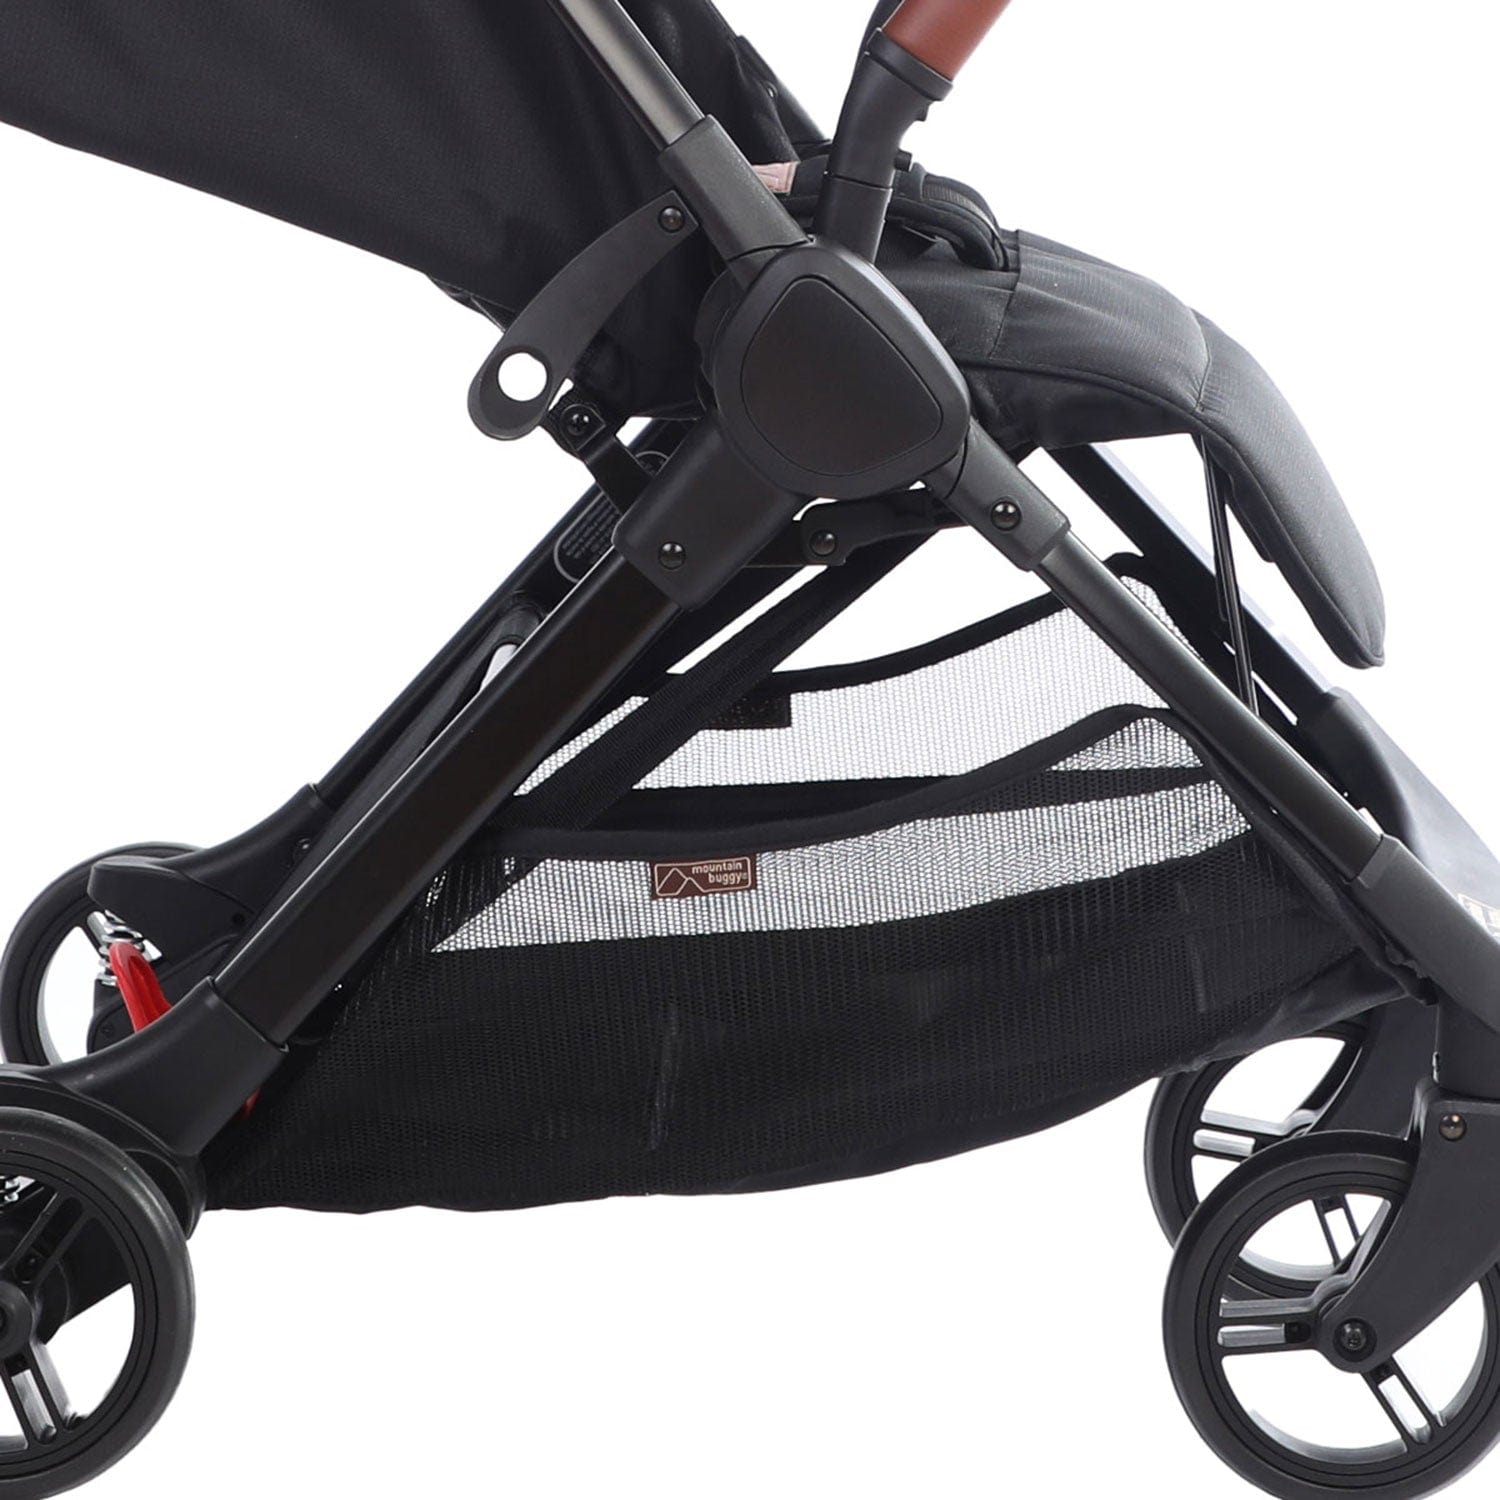 Mountain Buggy baby pushchairs Mountain Buggy Nano Urban with Accessory Bundle